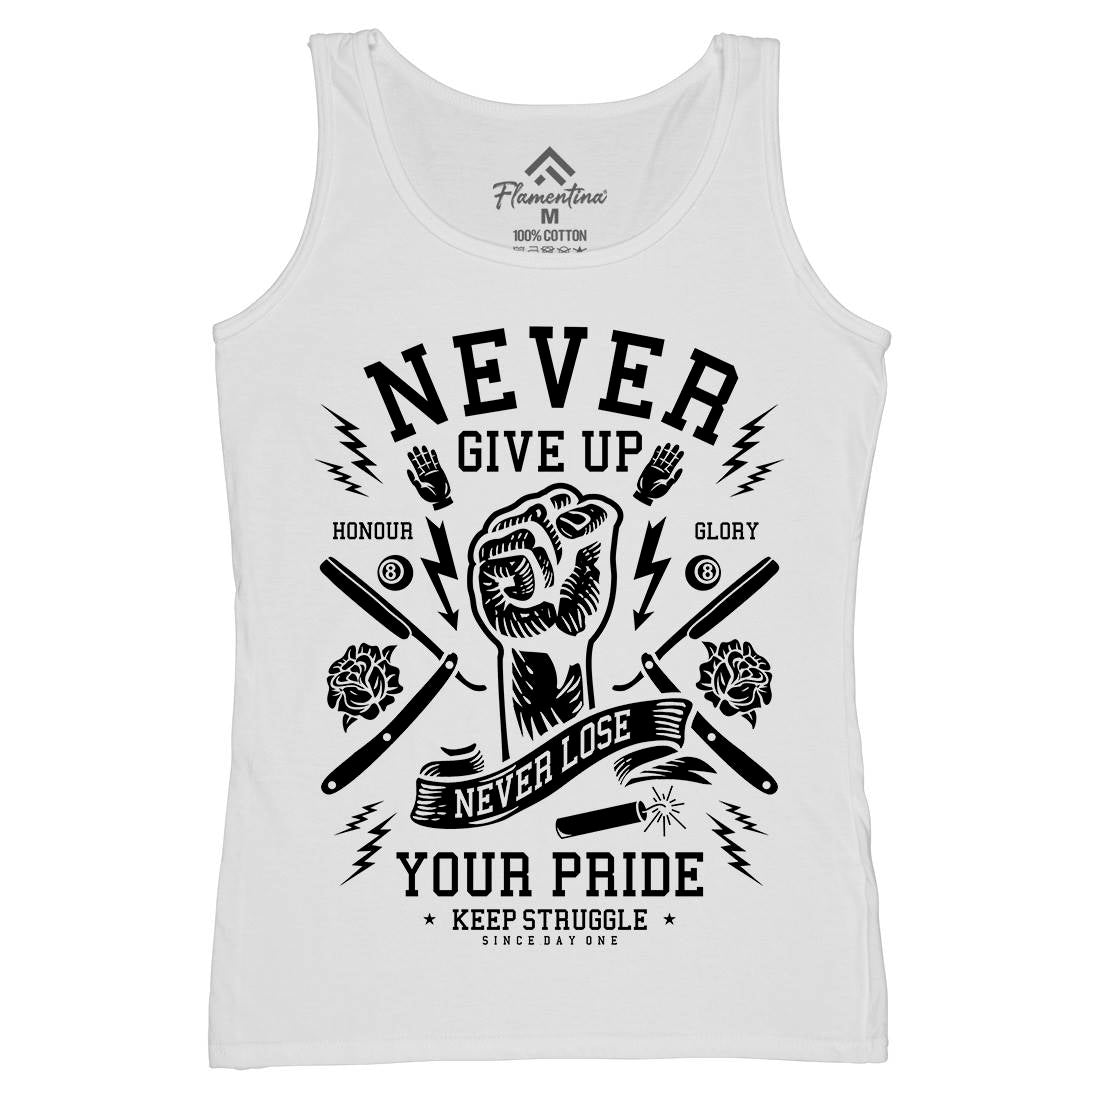 Never Give Up Womens Organic Tank Top Vest Quotes A254